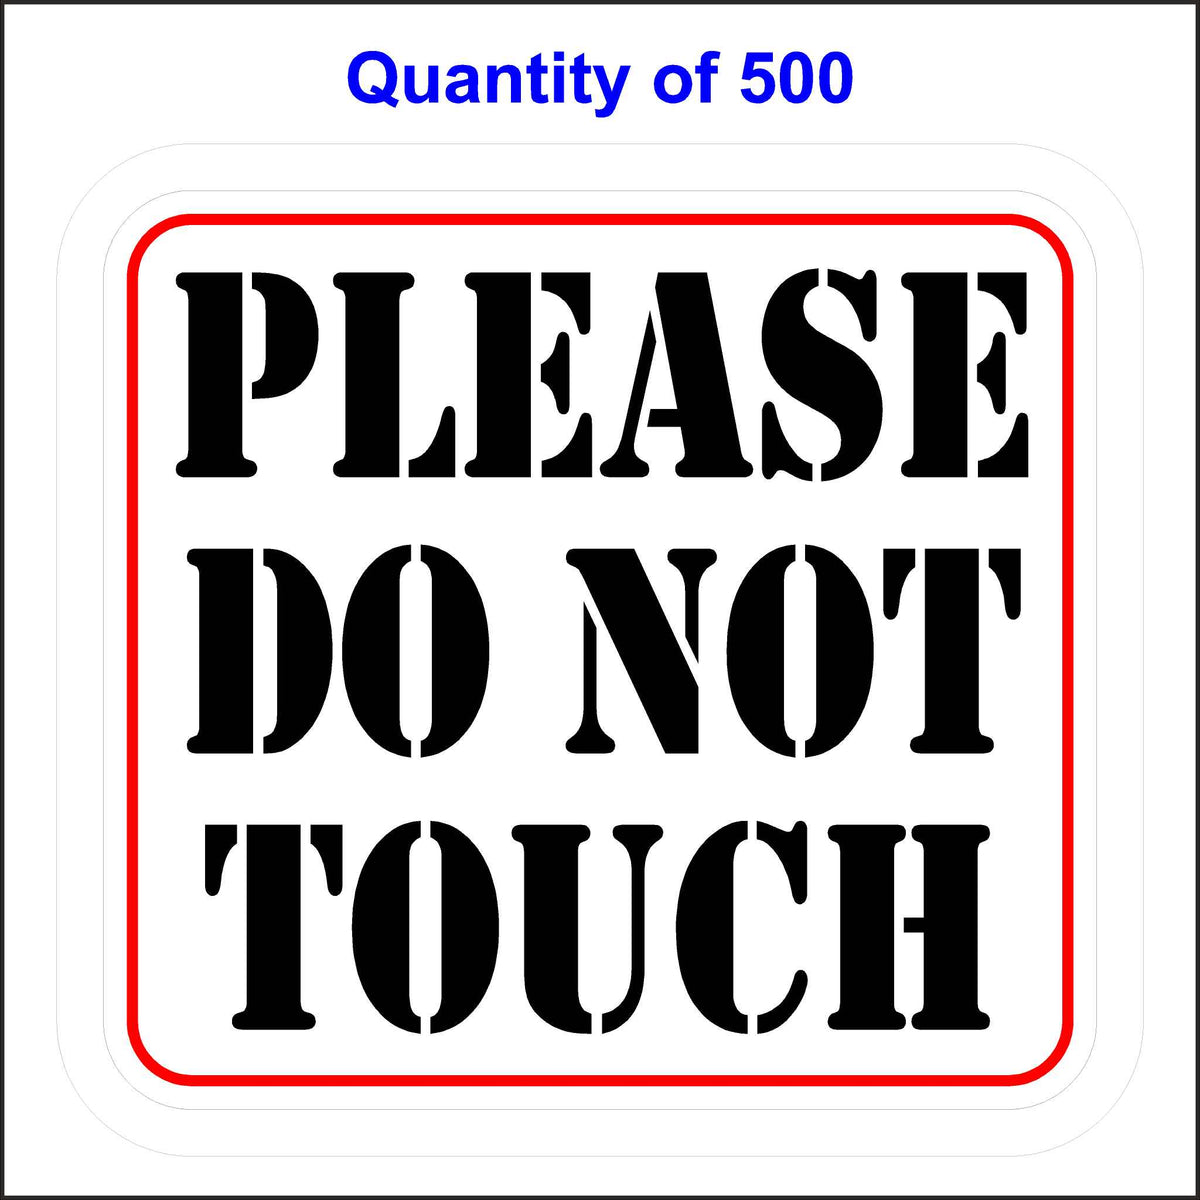 Please Do Not Touch Sticker With A White Background, Black Letters and Red Outline. 500 Quantity.